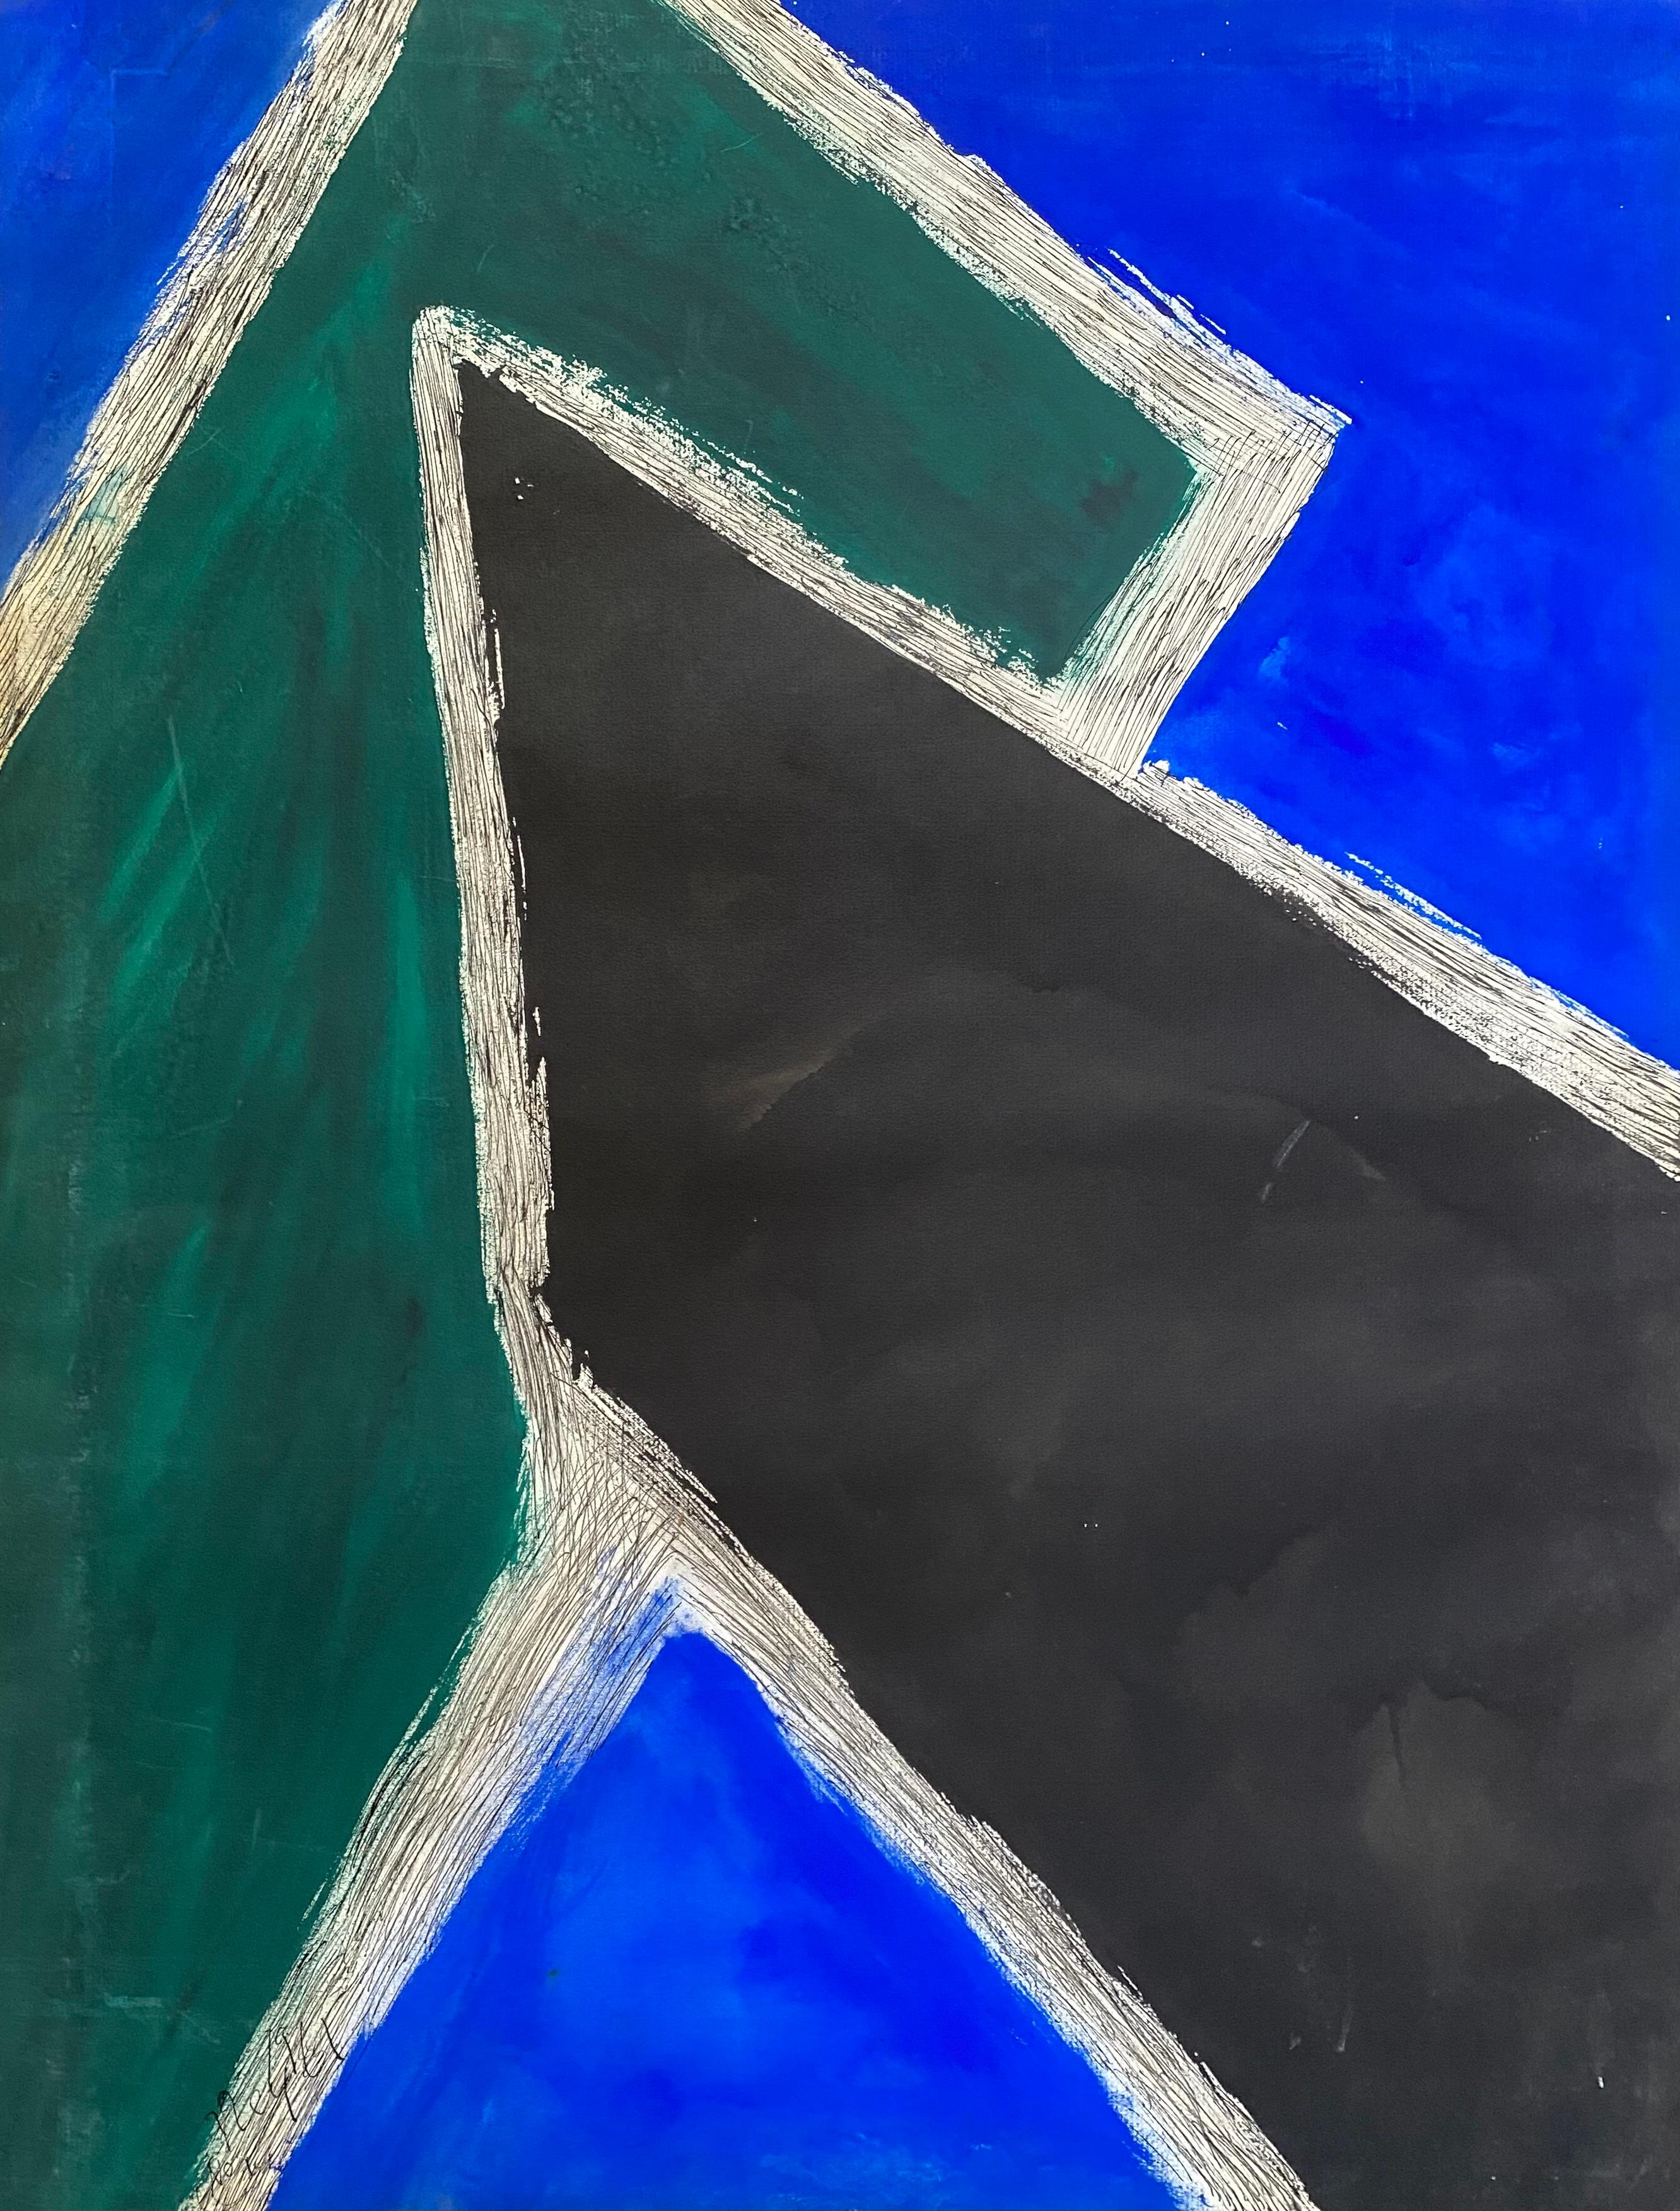 “Abstract in Blue, Black and Green” - Art by Lloyd Raymond Ney